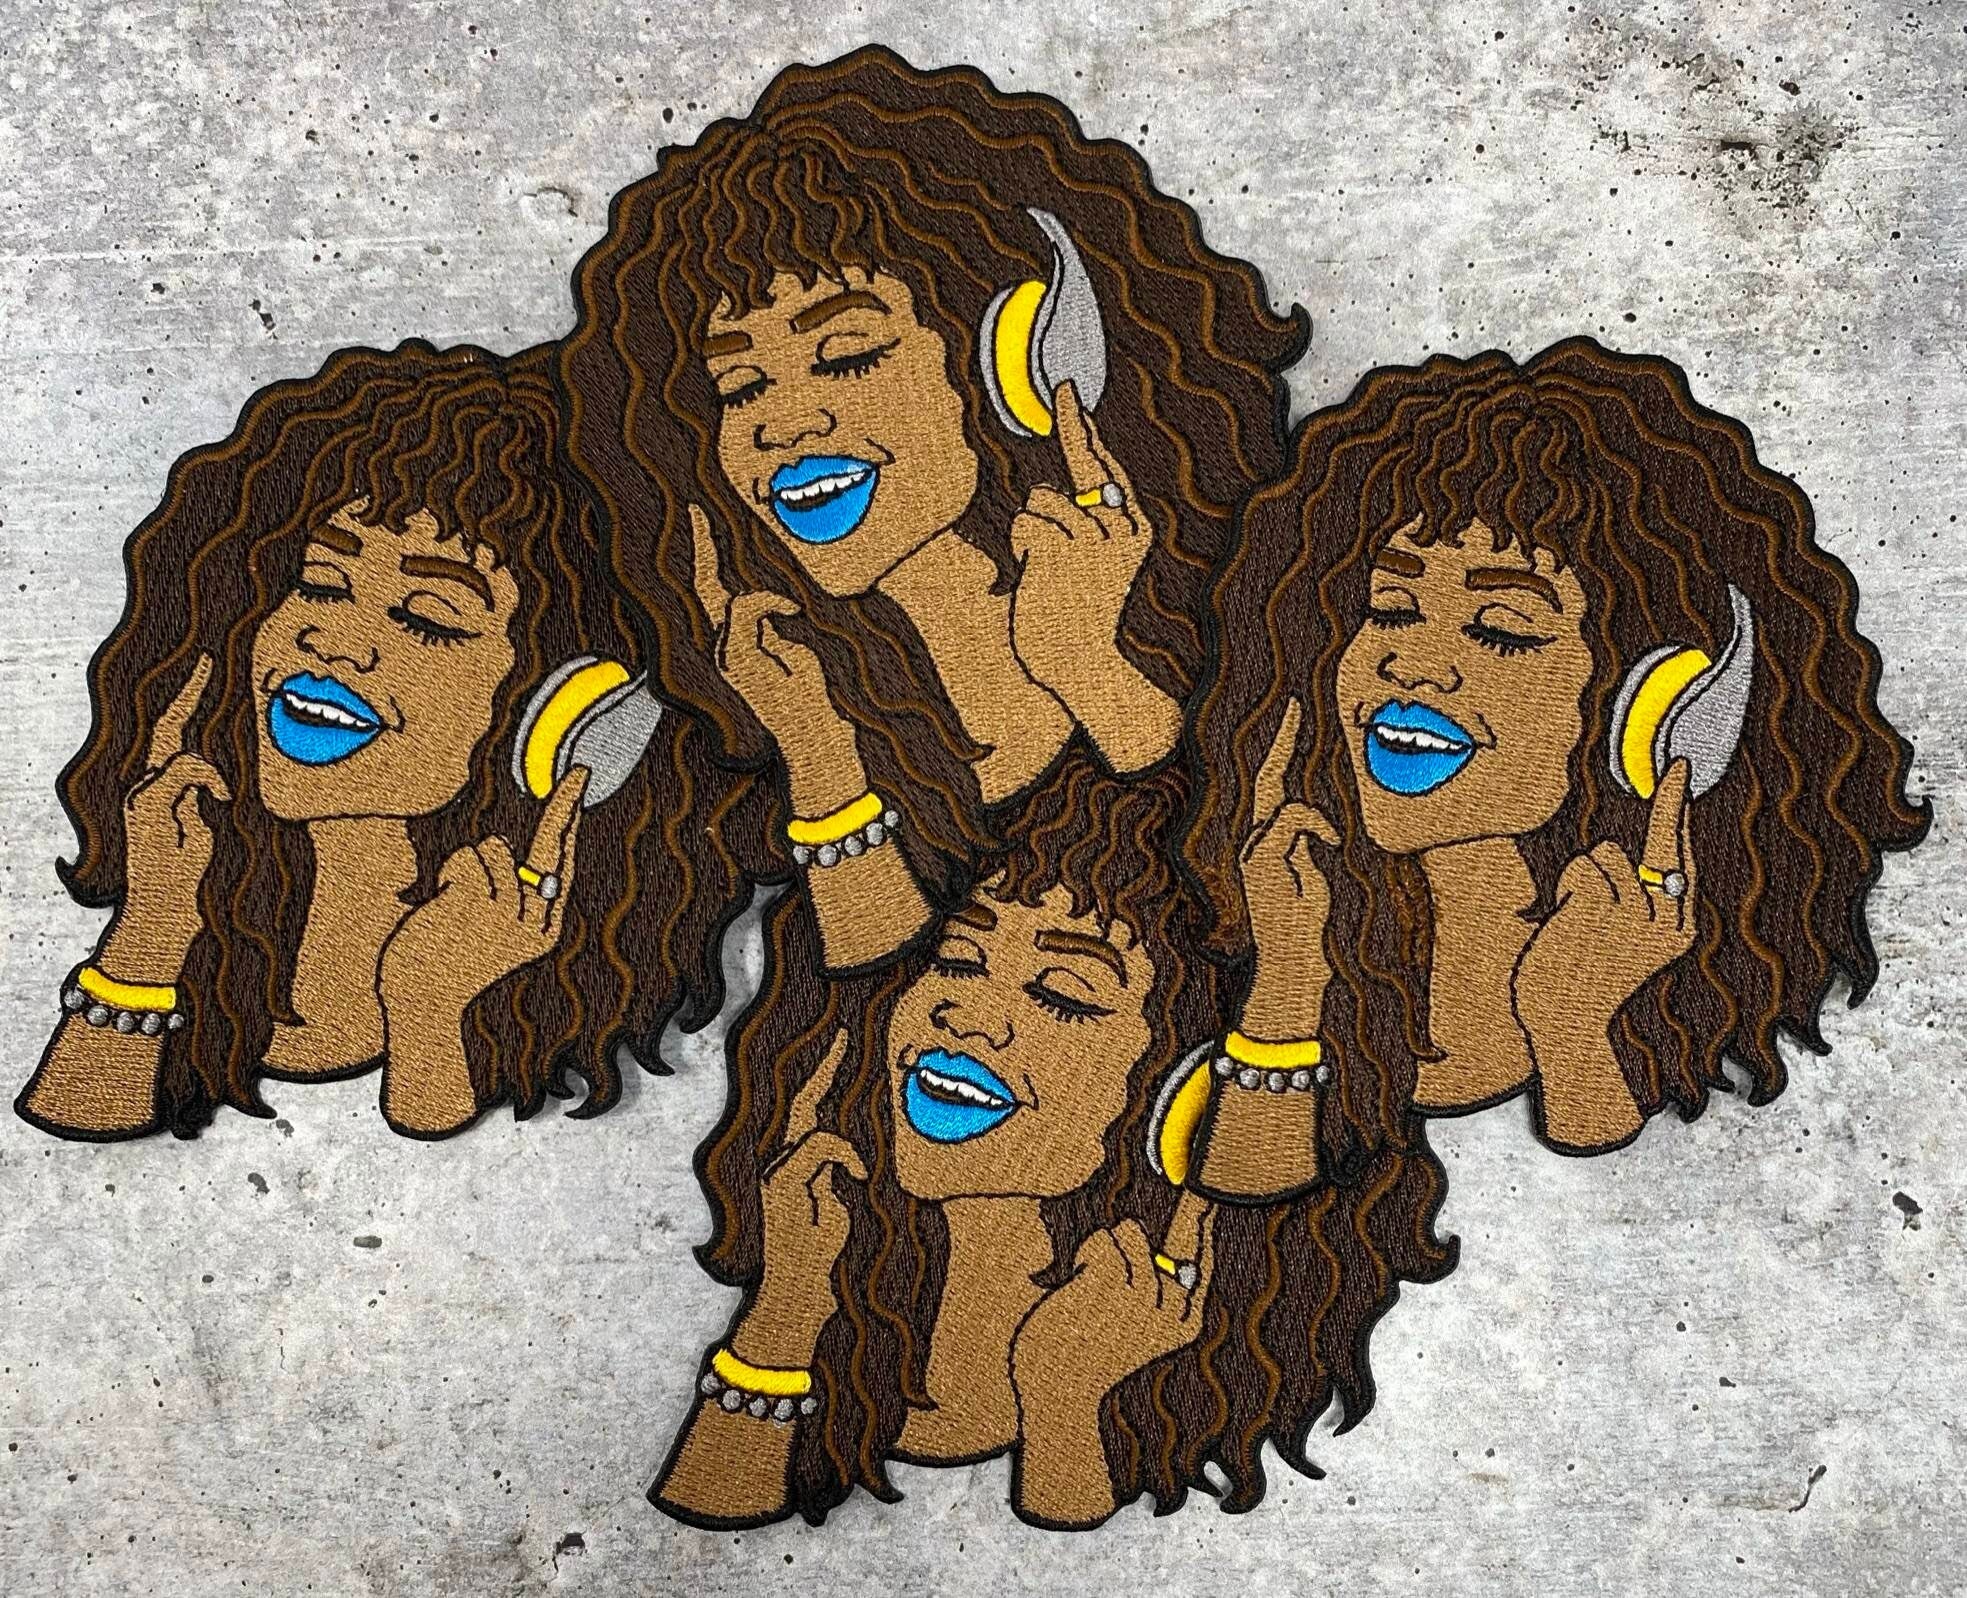 Sassy Chic "Groovin 2 Da Music" w/ Poppin Blue Lipgloss, Iron or Sew-on Embroidered Afrocentric Patch, Exclusive Appliques, Size 4.5", 1-pc